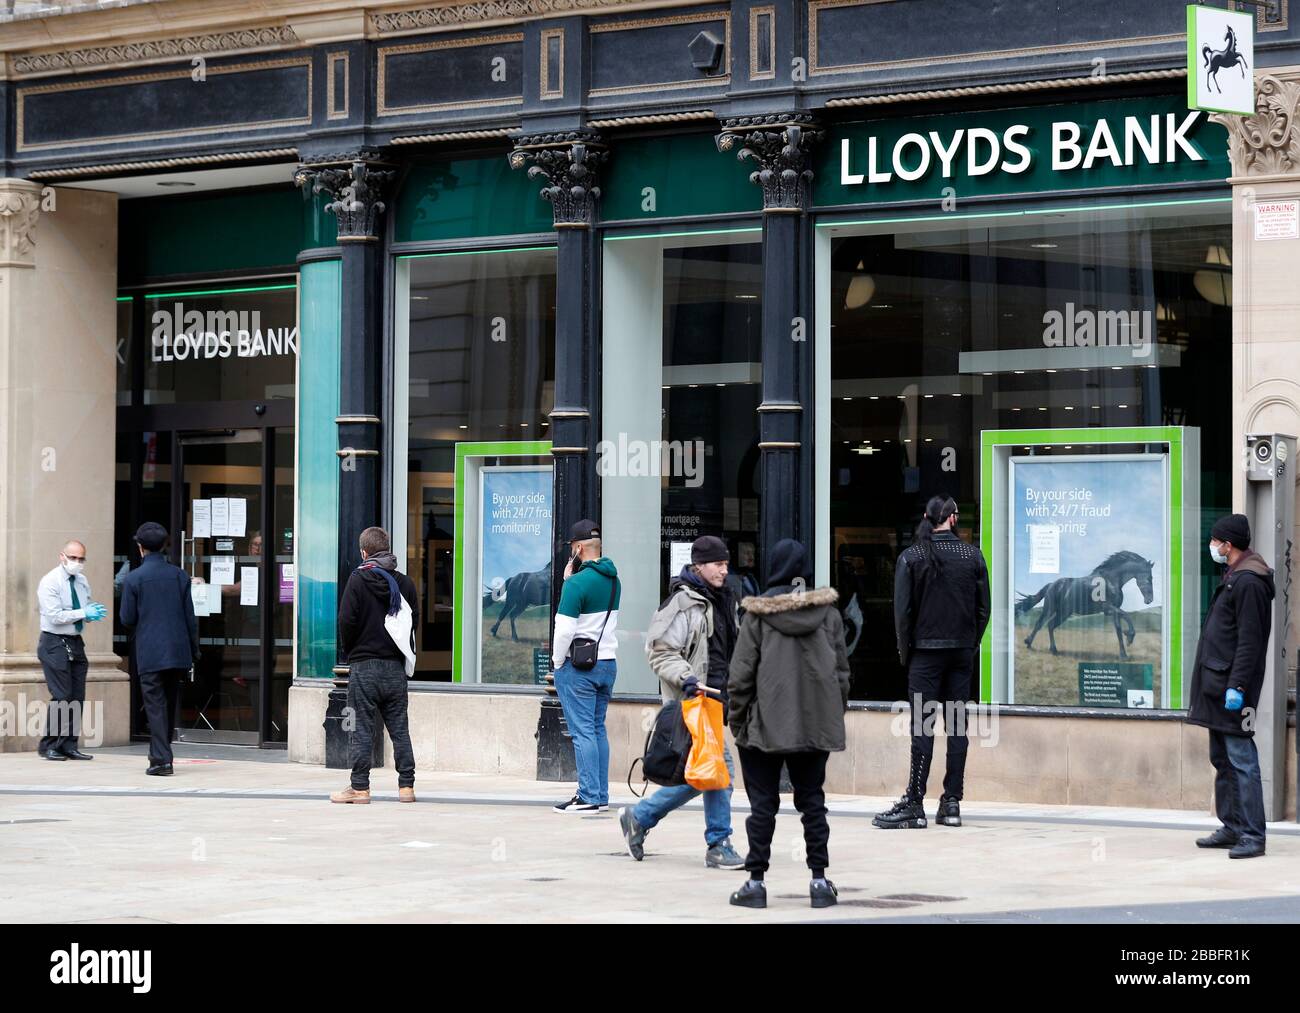 Birmingham, West Midlands, UK. 31st March 2020.  Customers practice social distancing as they wait to enter Lloyds Bank in Birmingham city centre during the Coronavirus pandemic lockdown. Credit Darren Staples/Alamy Live News. Stock Photo